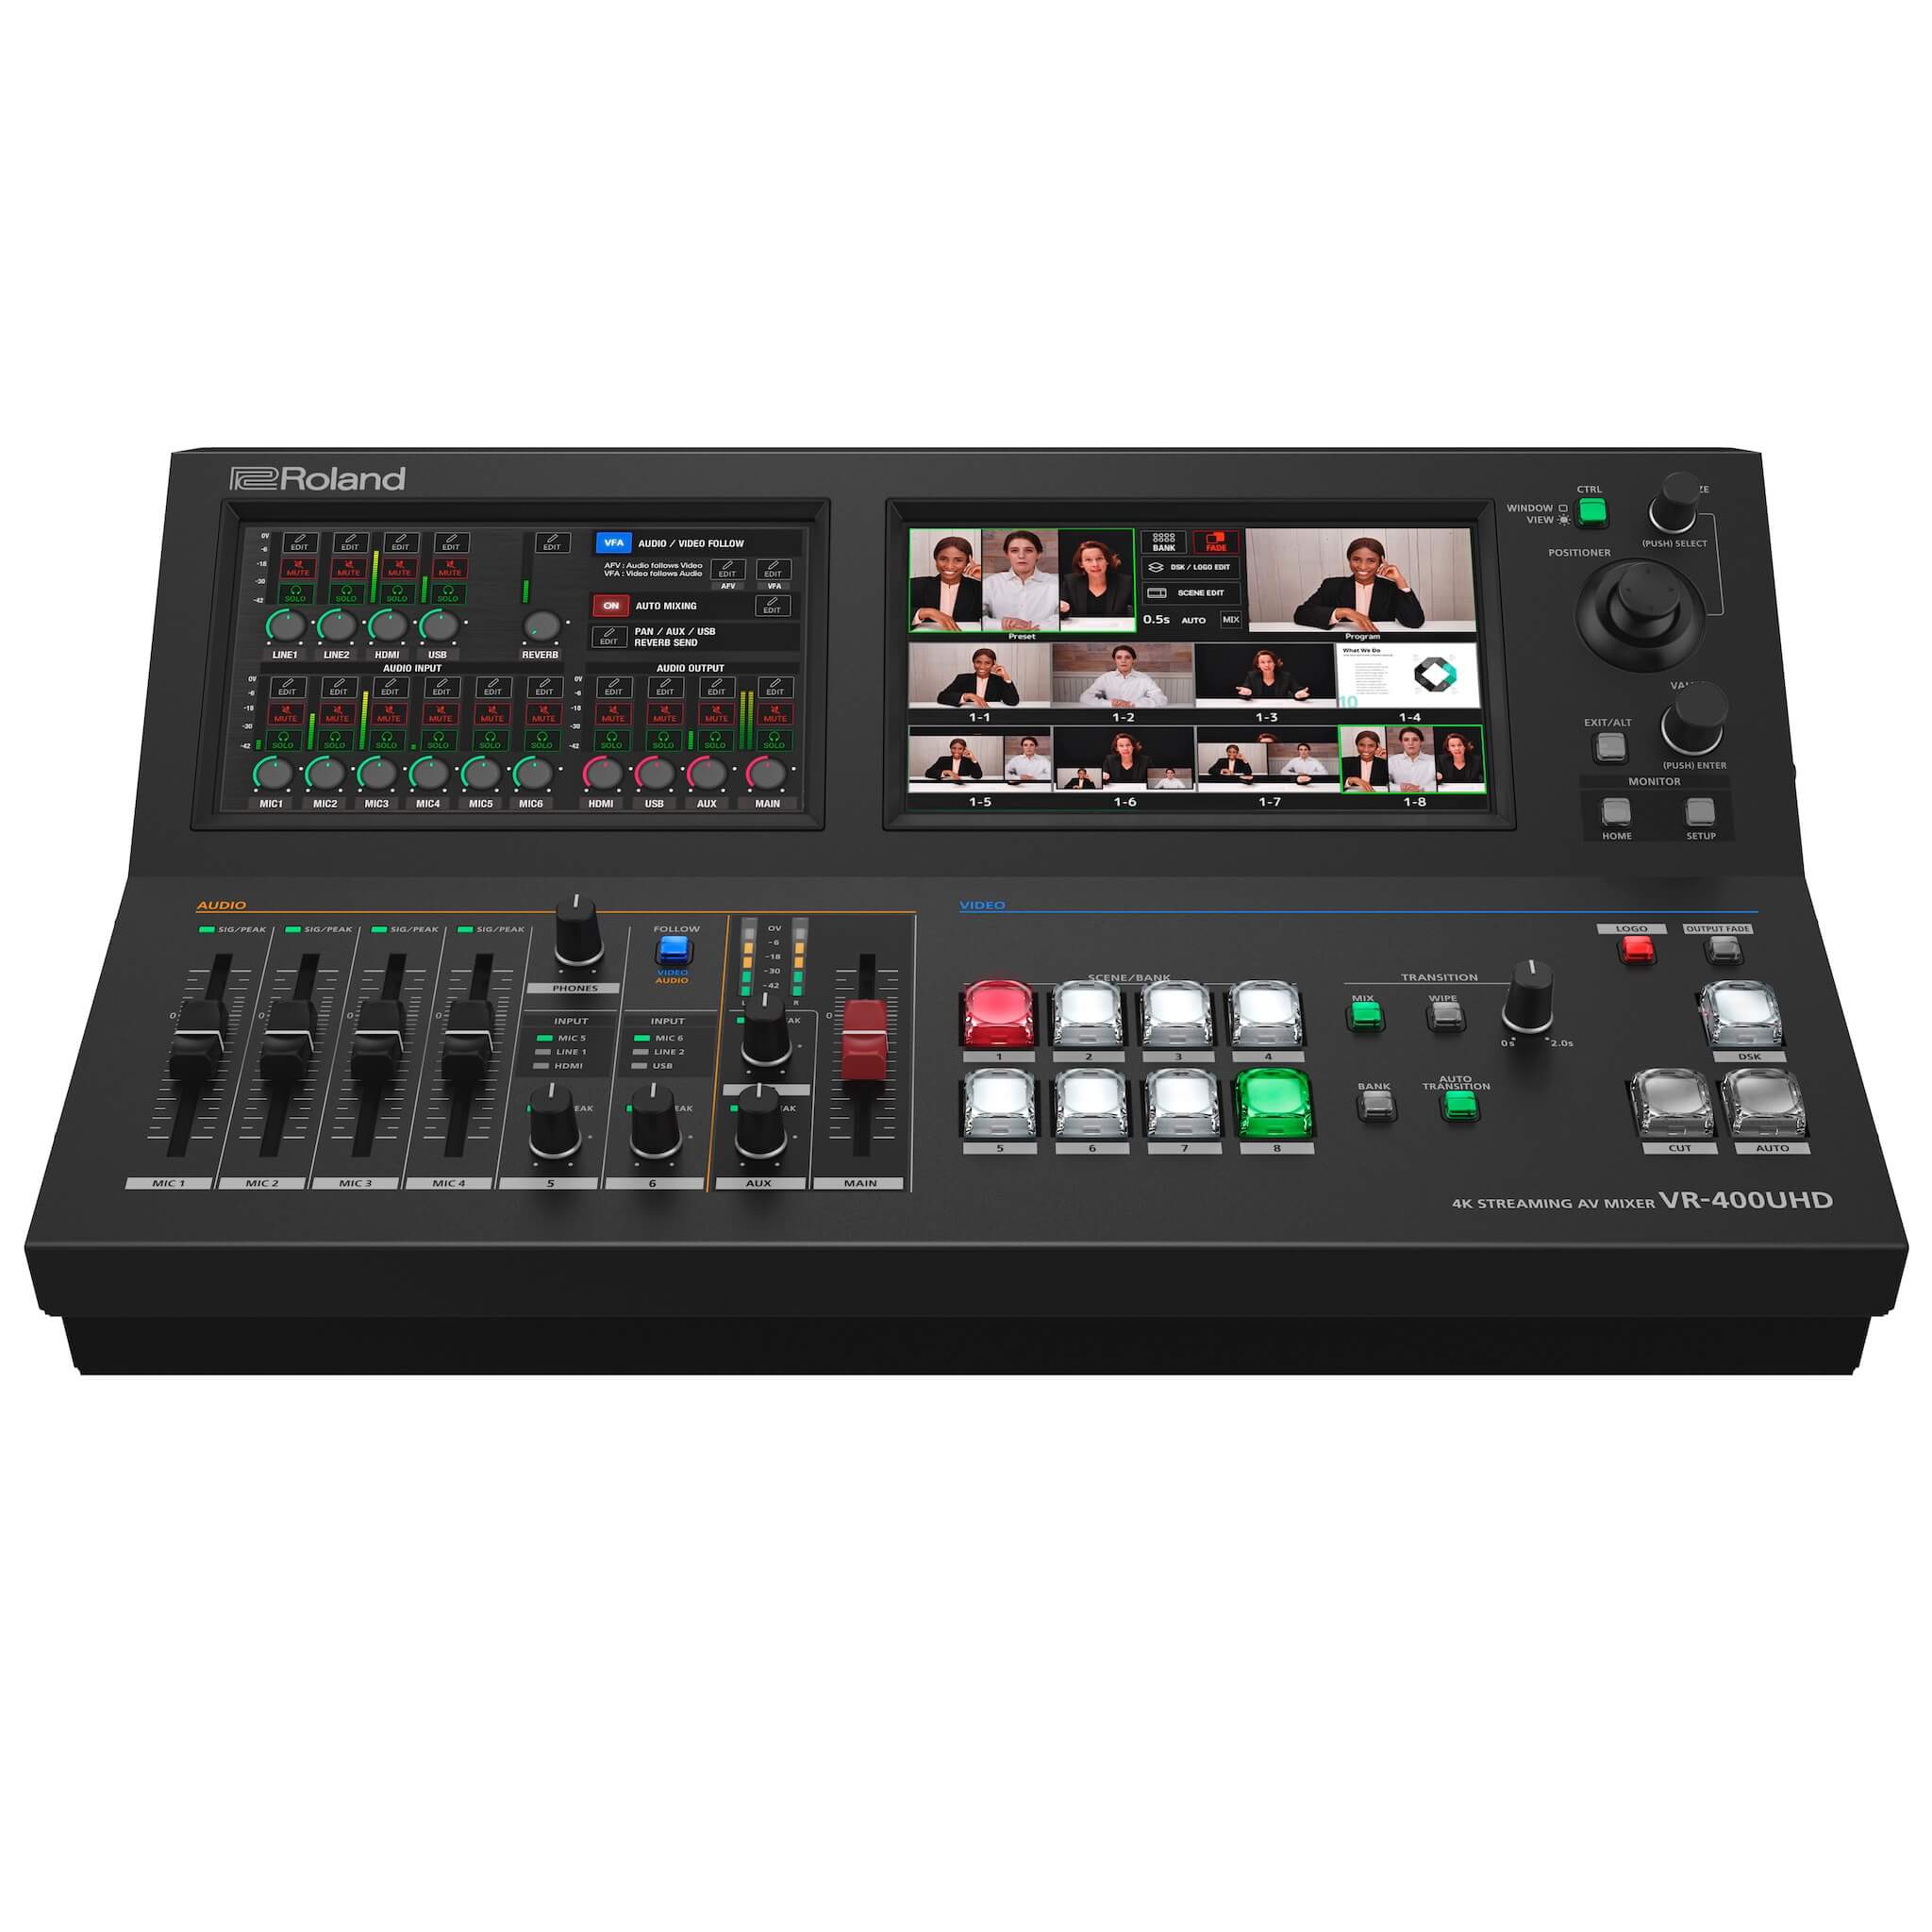 Roland VR-400UHD - 4K Direct Streaming AV Mixer with Dual Touchscreens, front